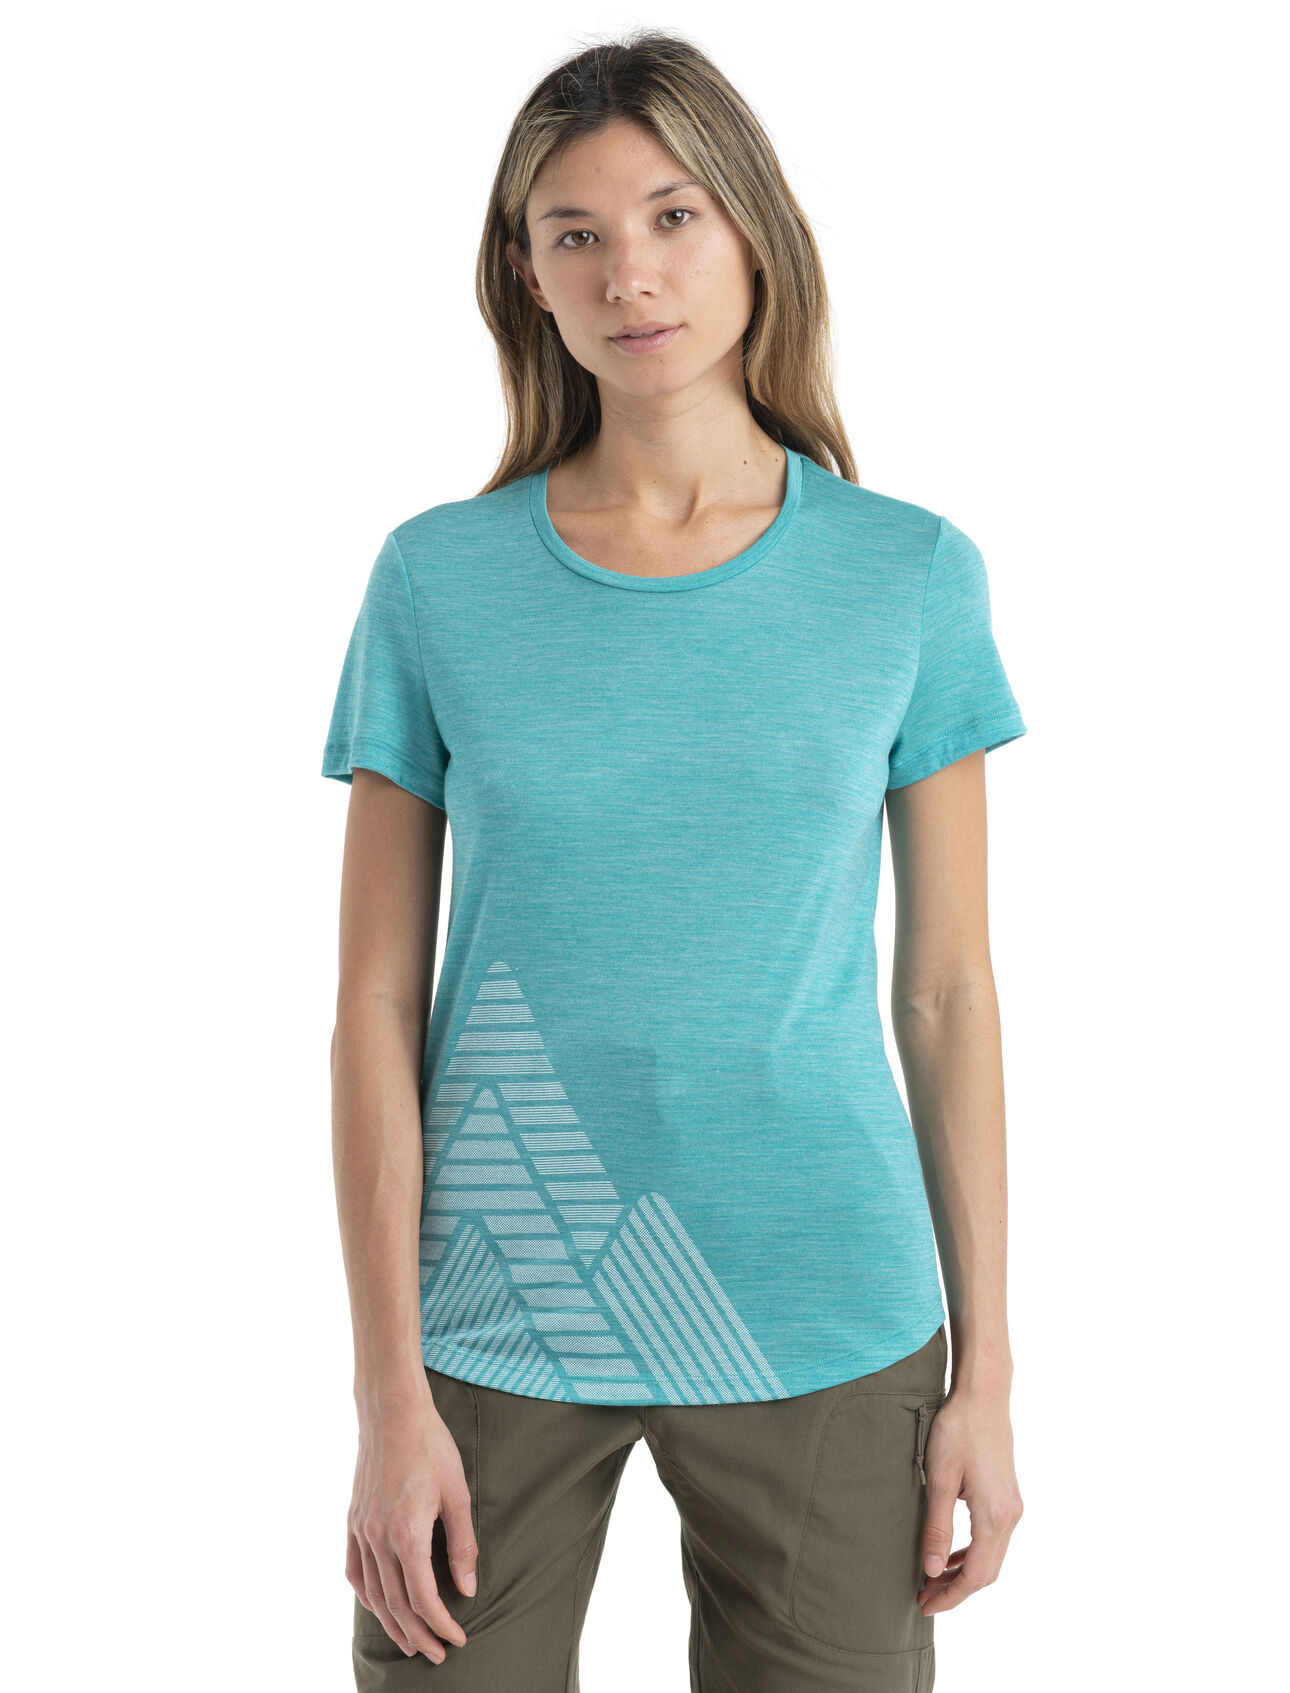 Womens 125 Cool-Lite™ Merino Sphere II Short Sleeve T-Shirt Peak Quest A soft merino-blend tee made with our lightweight Cool-Lite™ jersey fabric, the 125 Cool-Lite™Sphere II Short Sleeve Tee Peak Quest provides natural breathability, odour resistance and comfort. The tee's original graphic print draws inspiration from taking on the challenge of the mountains, at any level.